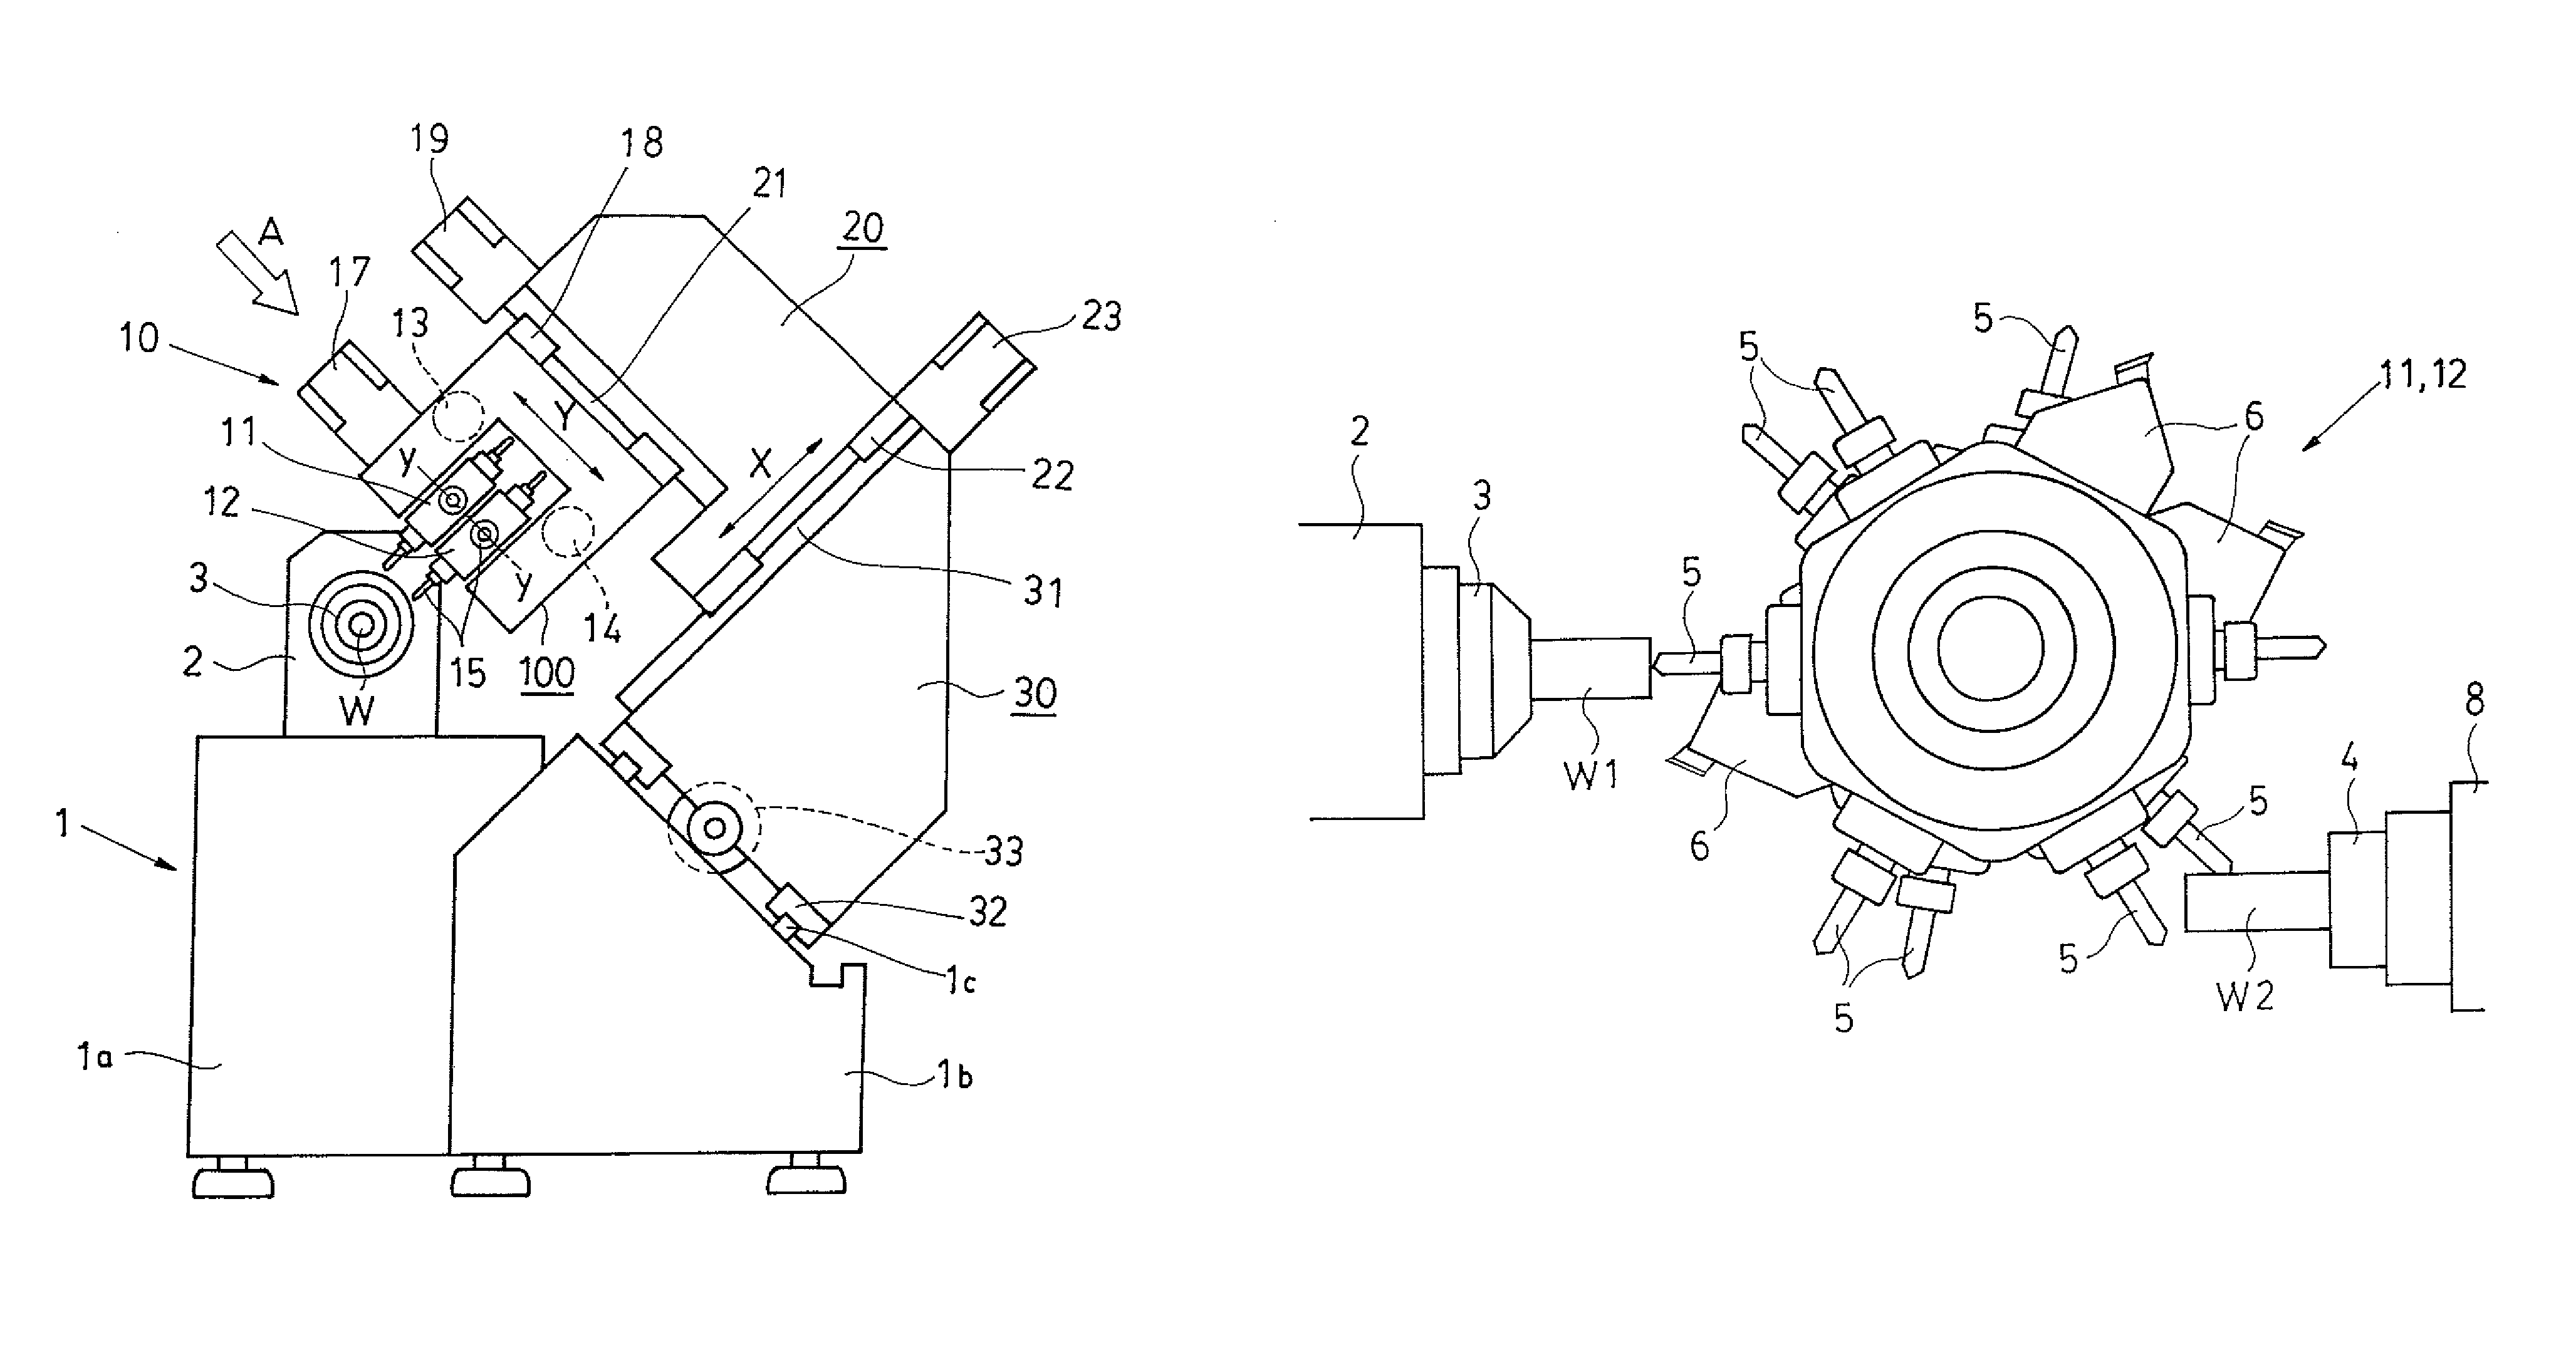 Combined processing lathe and its tool post